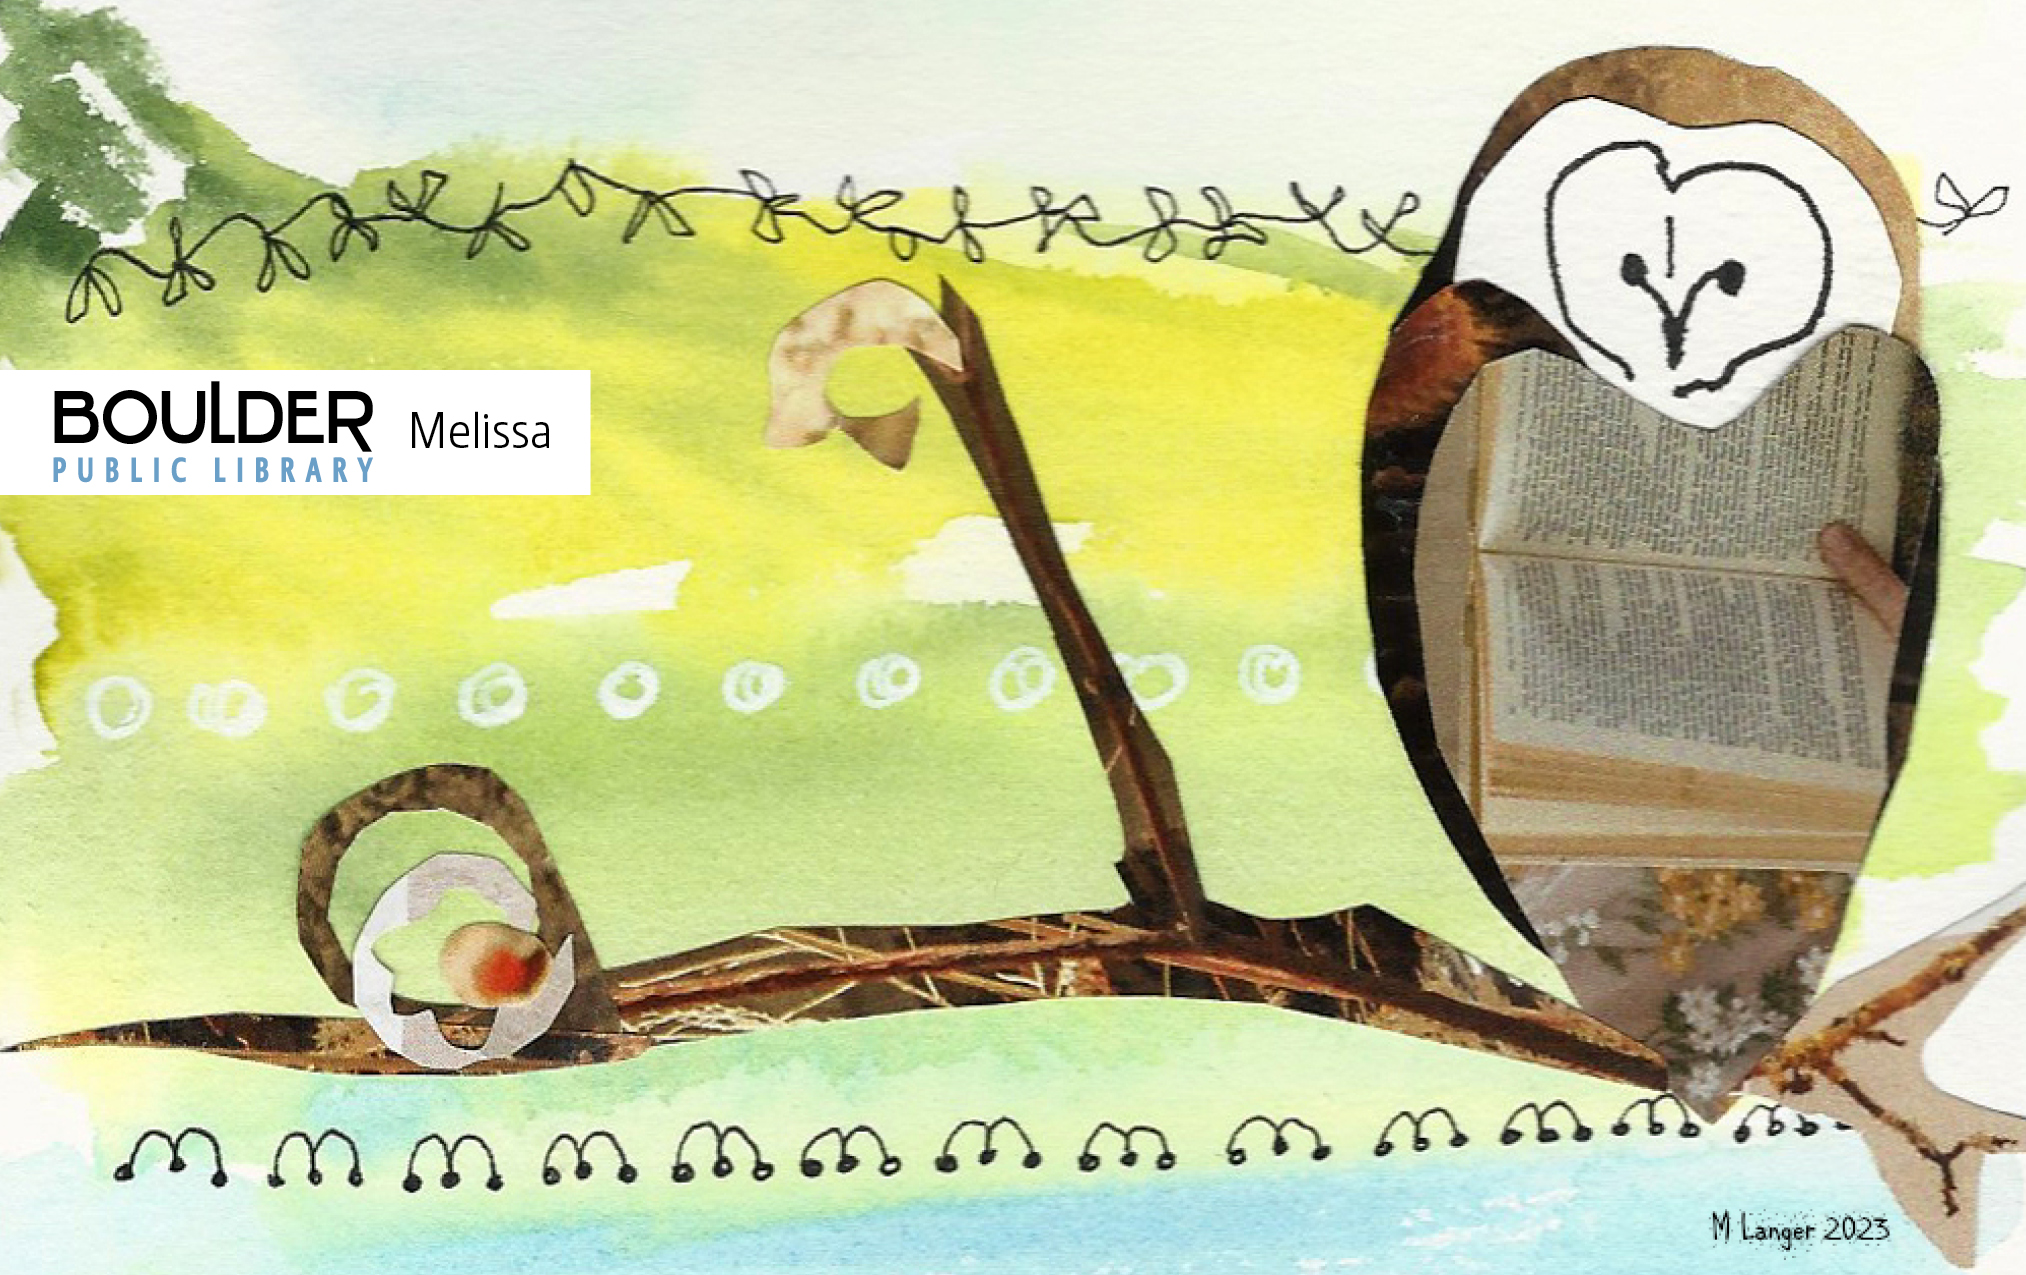 This card design has an owl, with an image of an open book for his torso. He is on a branch. It is by Melissa